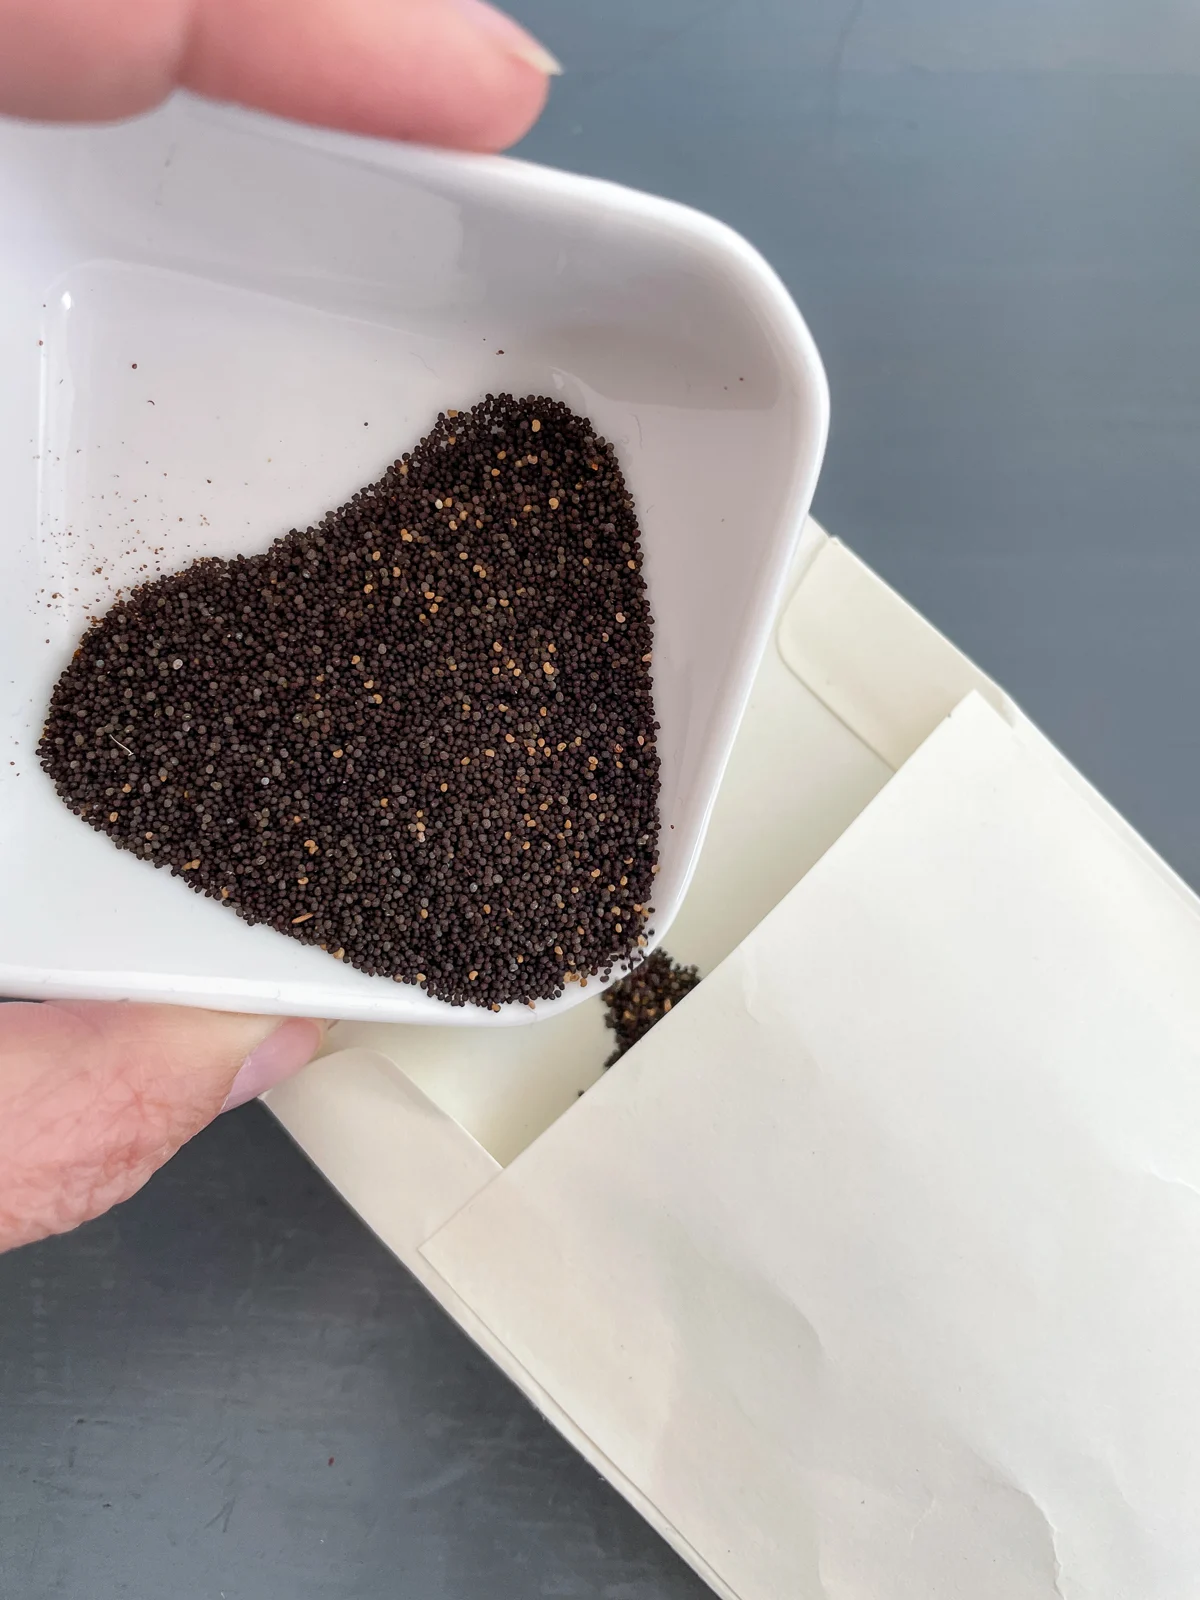 pouring harvested poppy seeds into envelope for storage